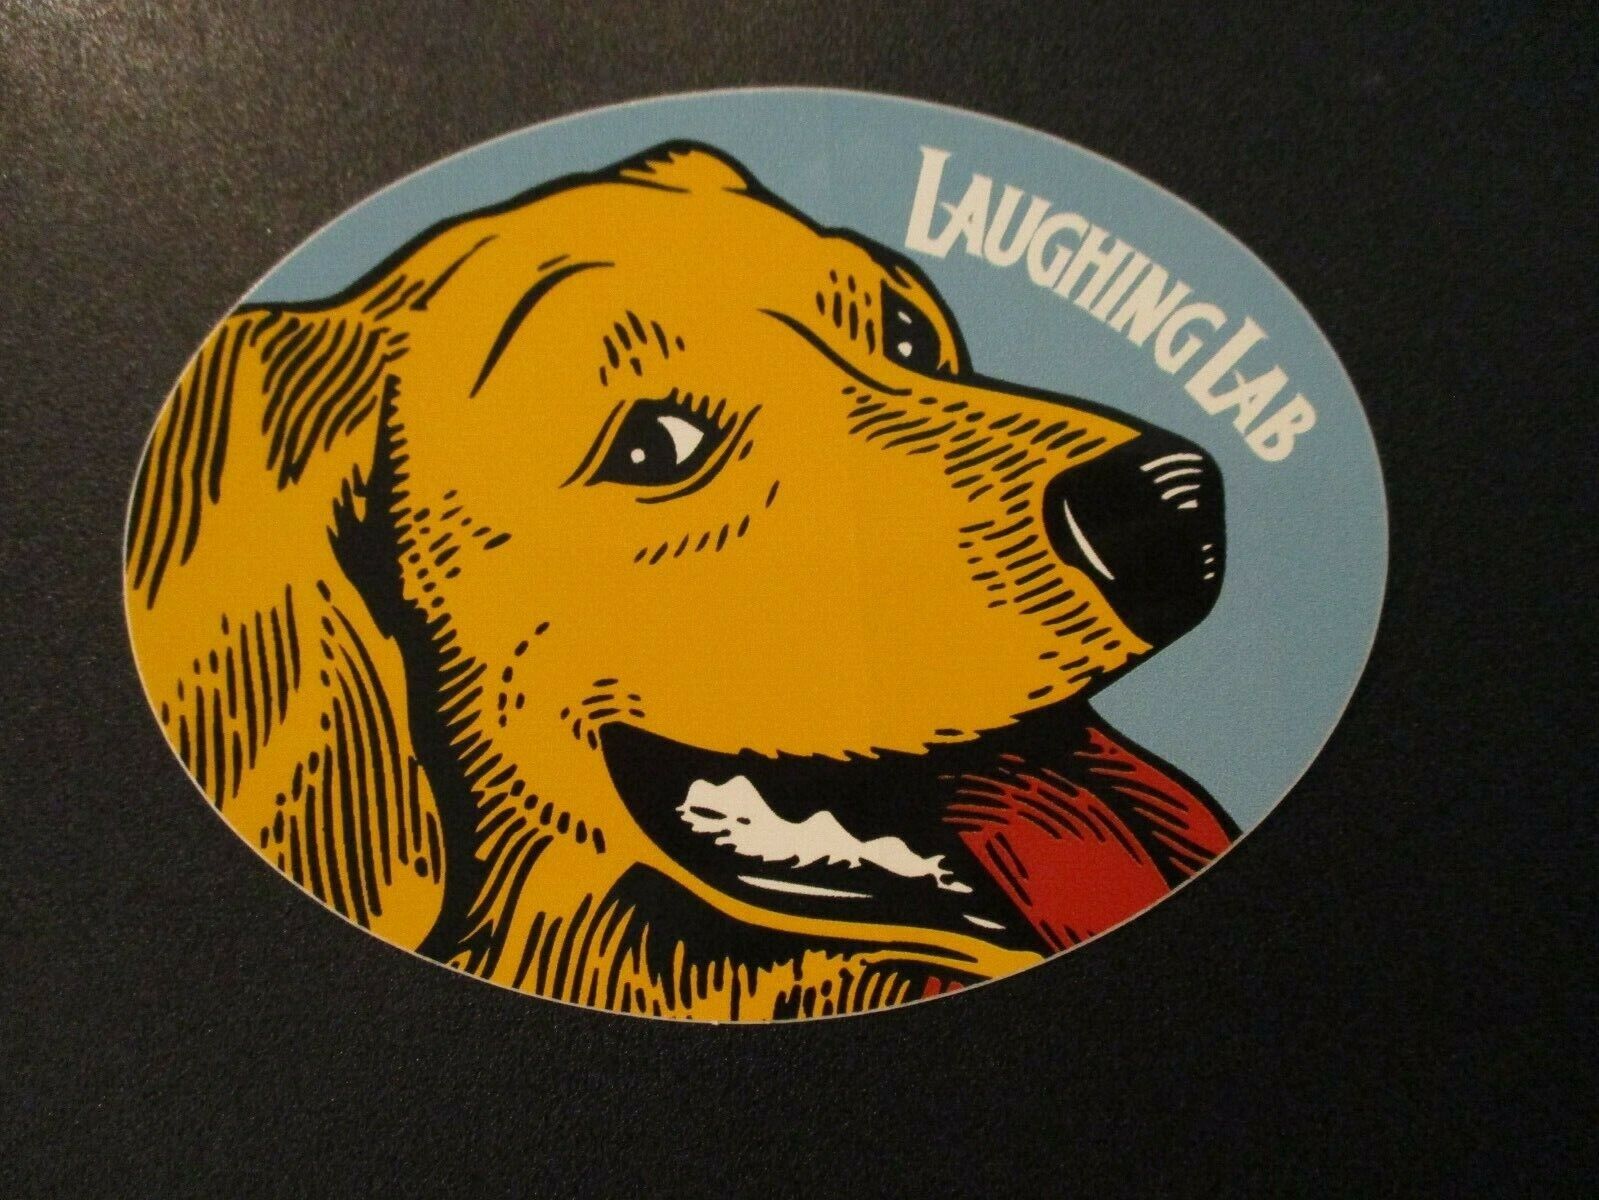 BRISTOL BREWING CO colorado Laughing Lab oval STICKER decal craft beer brewery